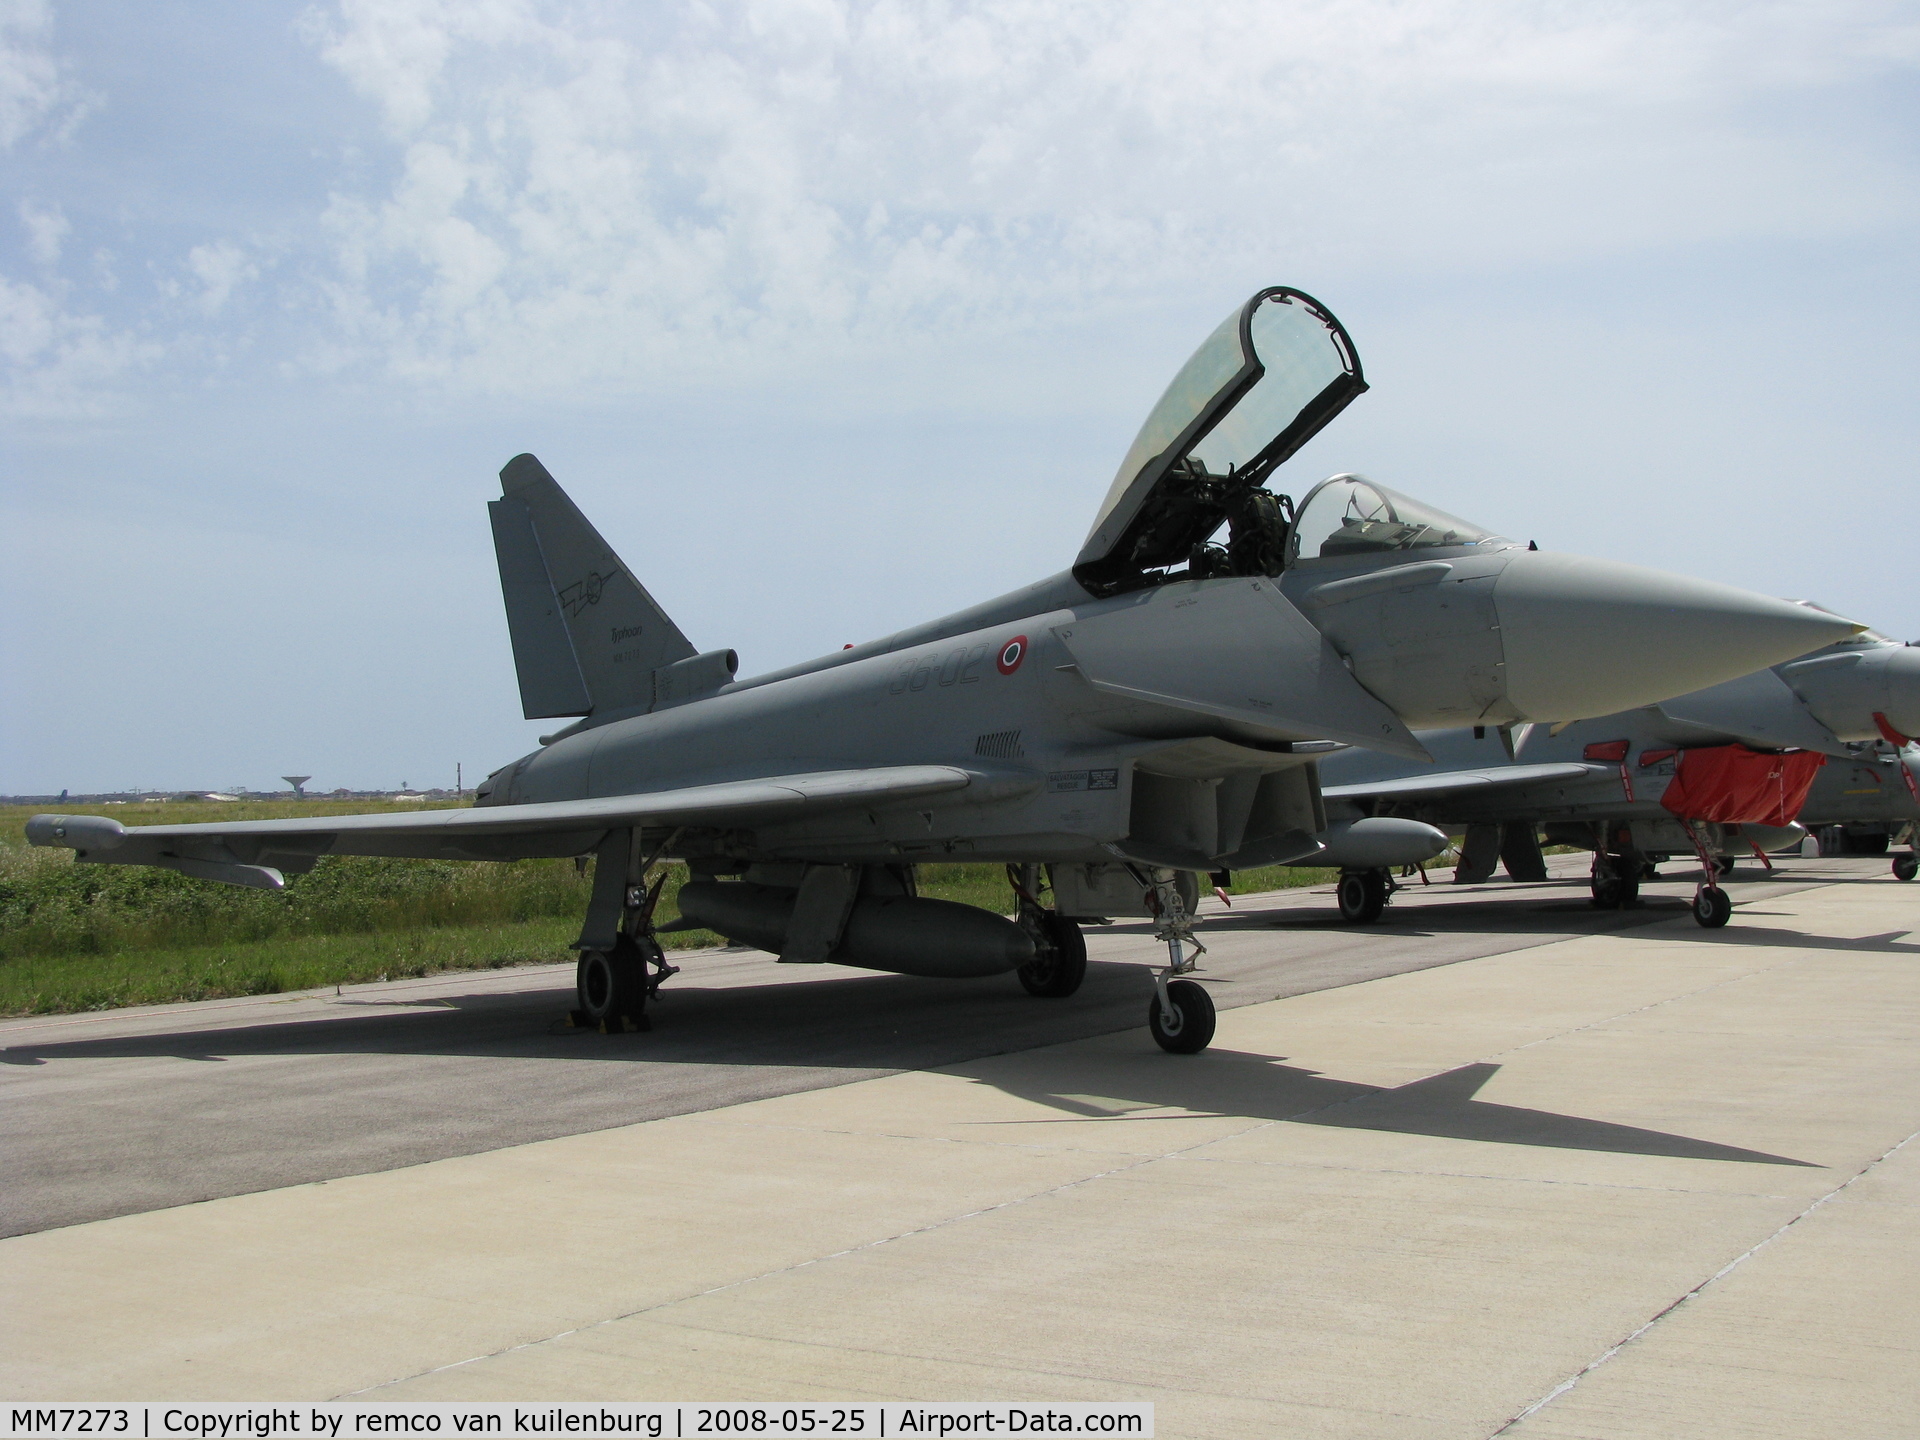 MM7273, 2005 Eurofighter EF-2000 Typhoon S C/N IS005, on a sunny open day at Pratica di Mare